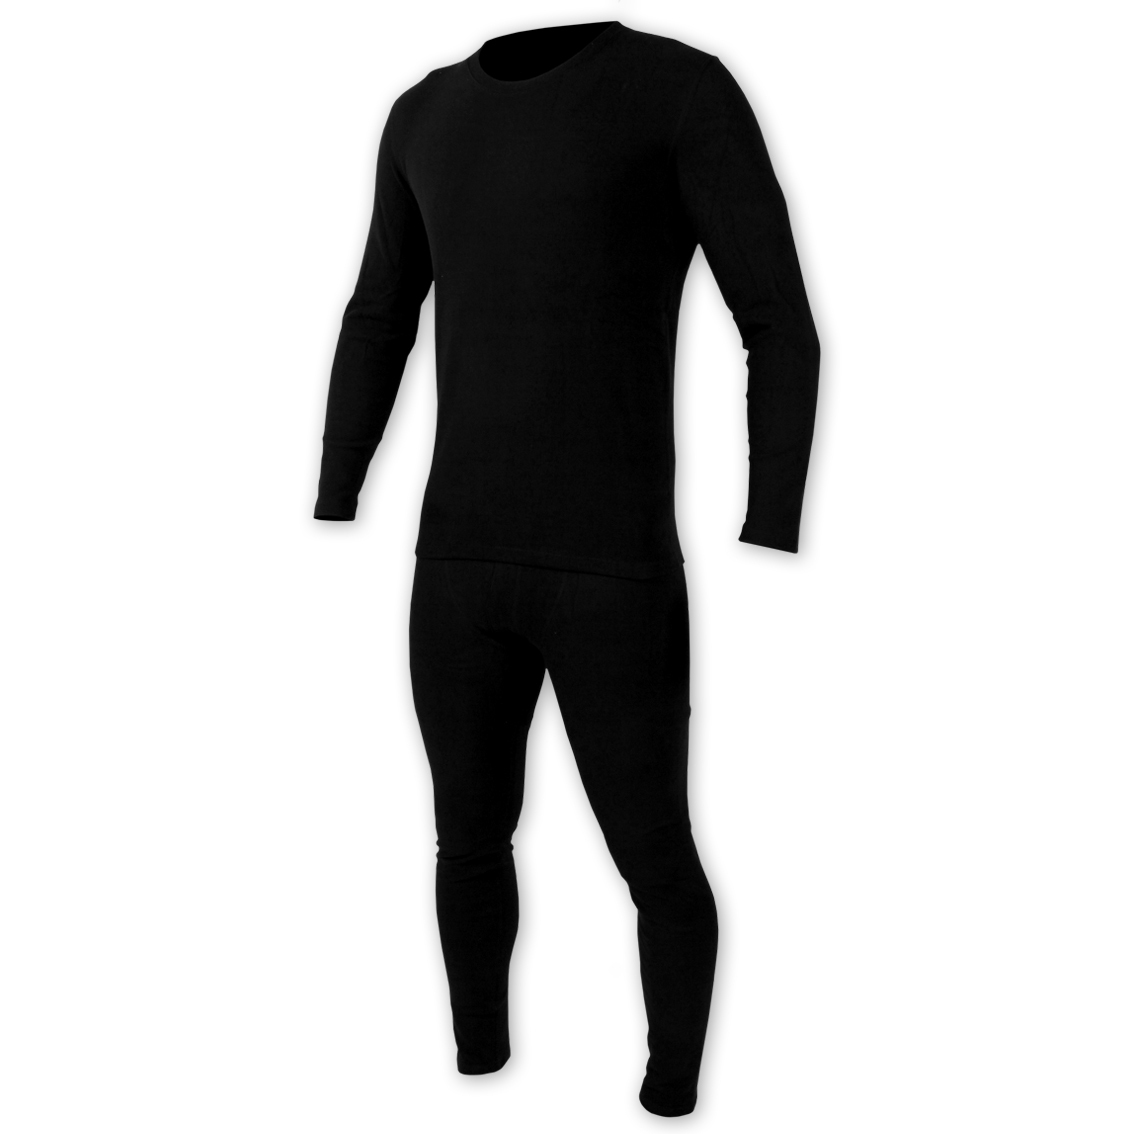 SHARK THERMALS [Top + Bottom] - Shark Leathers